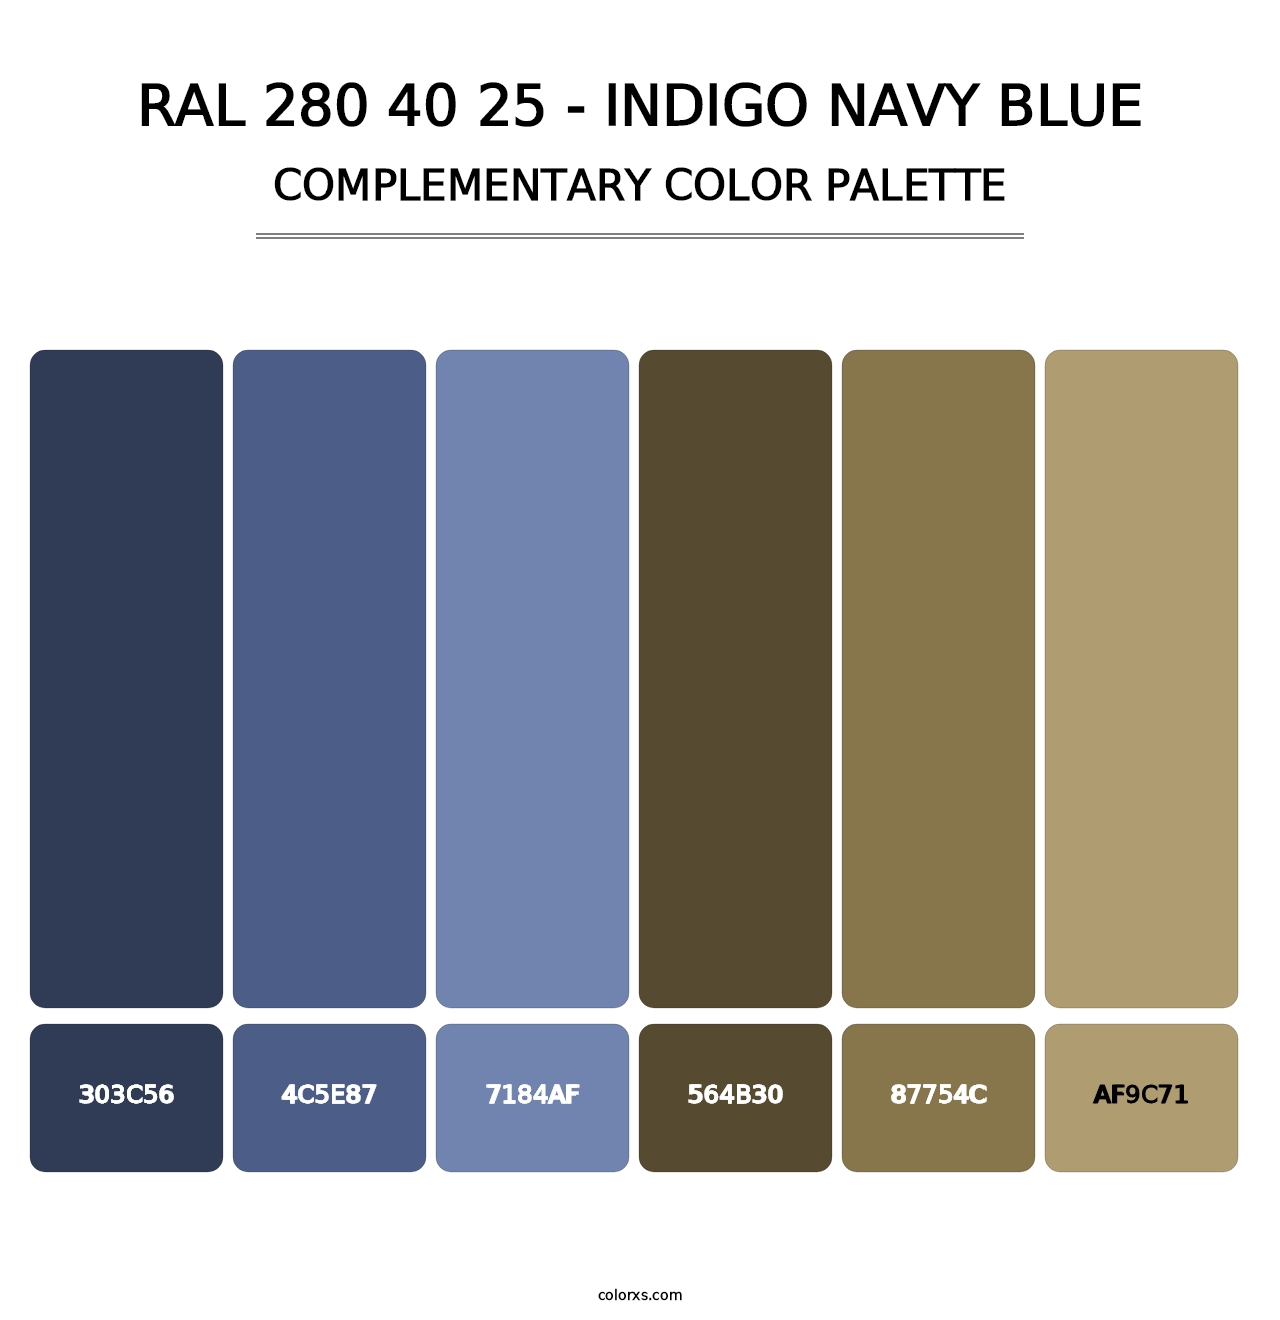 RAL 280 40 25 - Indigo Navy Blue - Complementary Color Palette